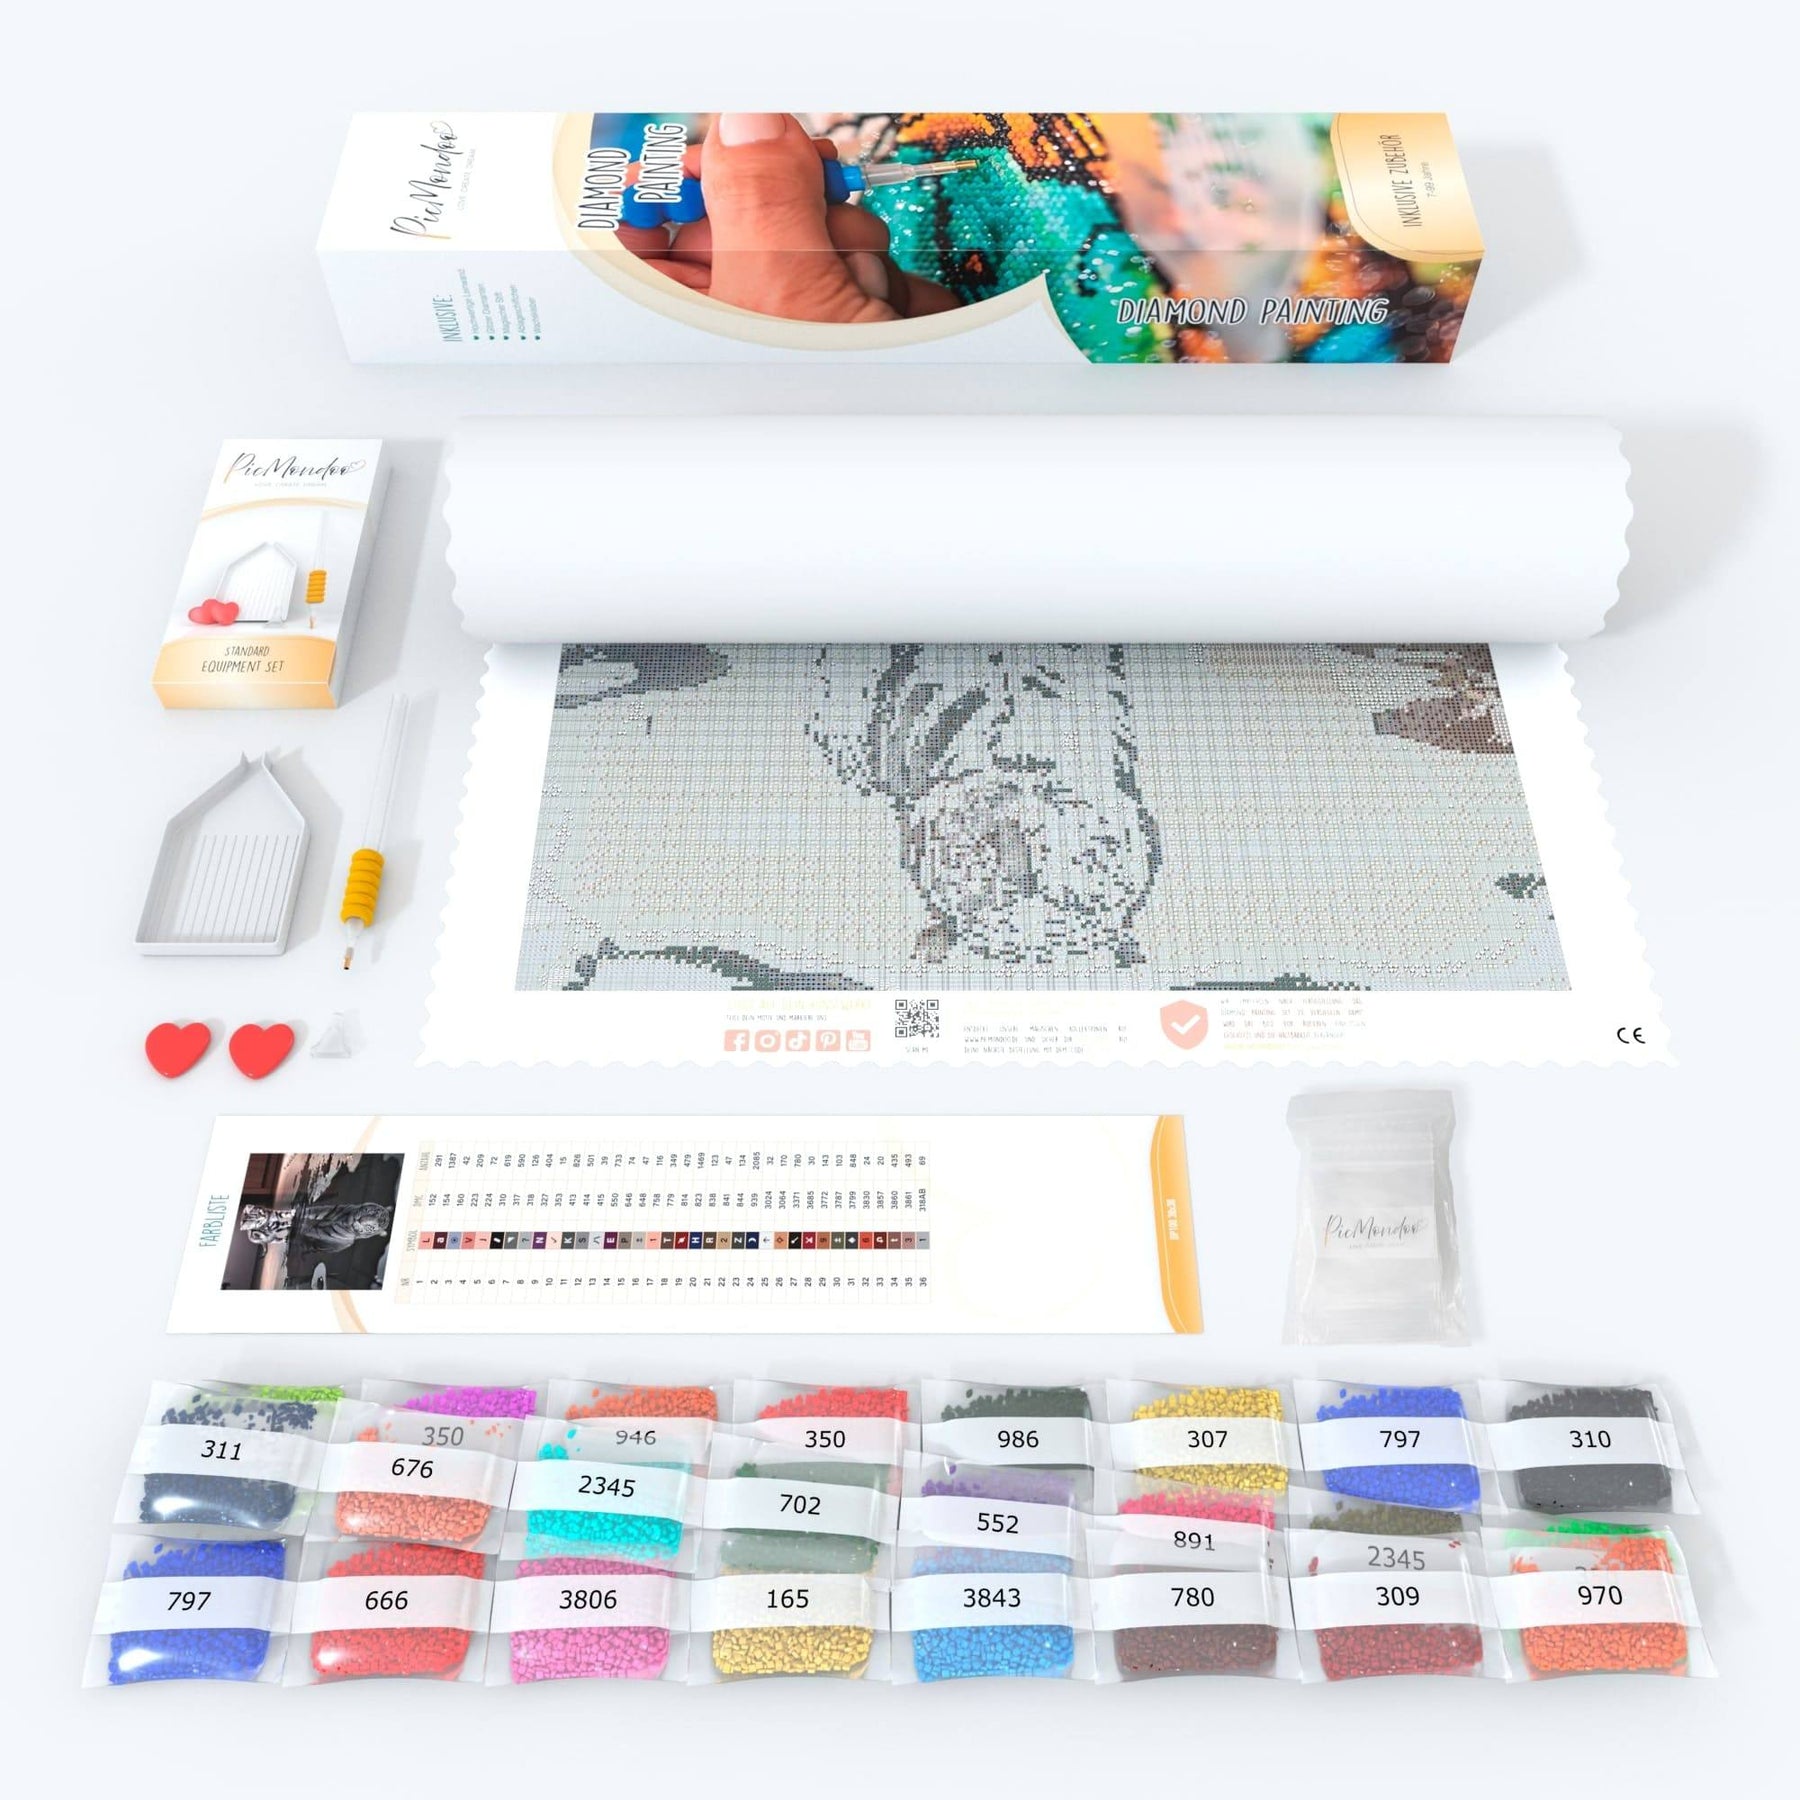 Diamond Painting Set Party Donuts